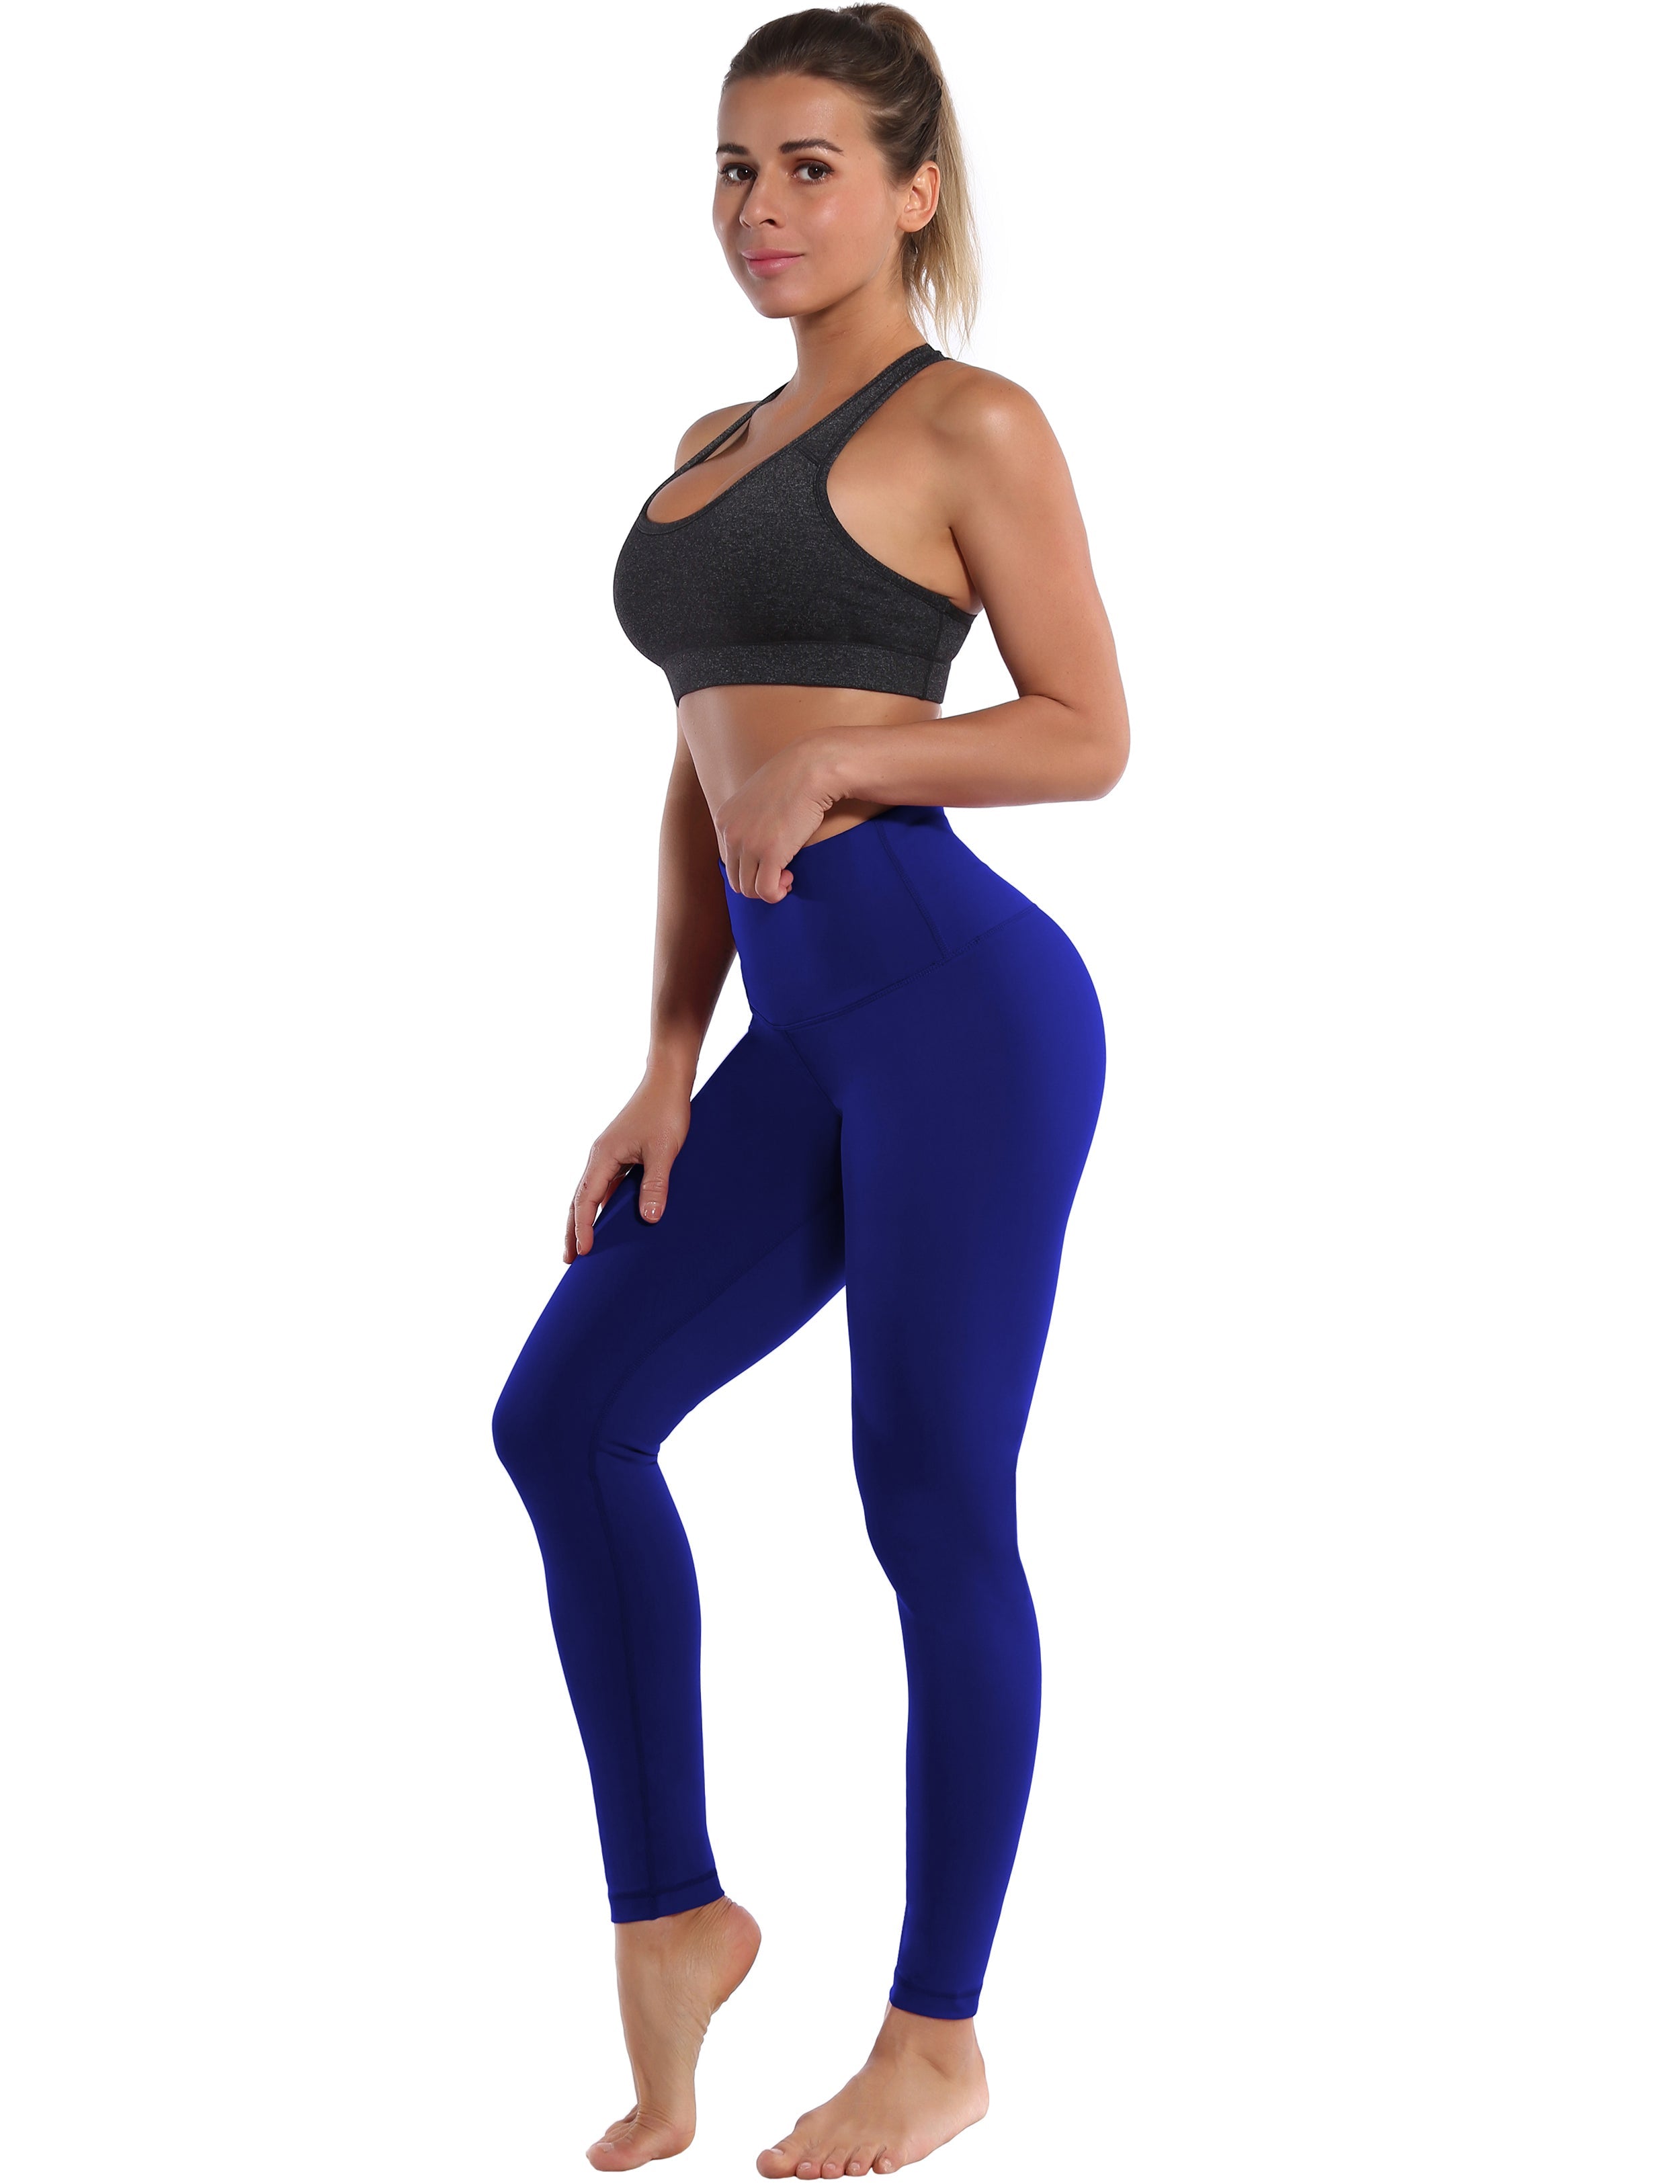 High Waist Biking Pants navy 75%Nylon/25%Spandex Fabric doesn't attract lint easily 4-way stretch No see-through Moisture-wicking Tummy control Inner pocket Four lengths